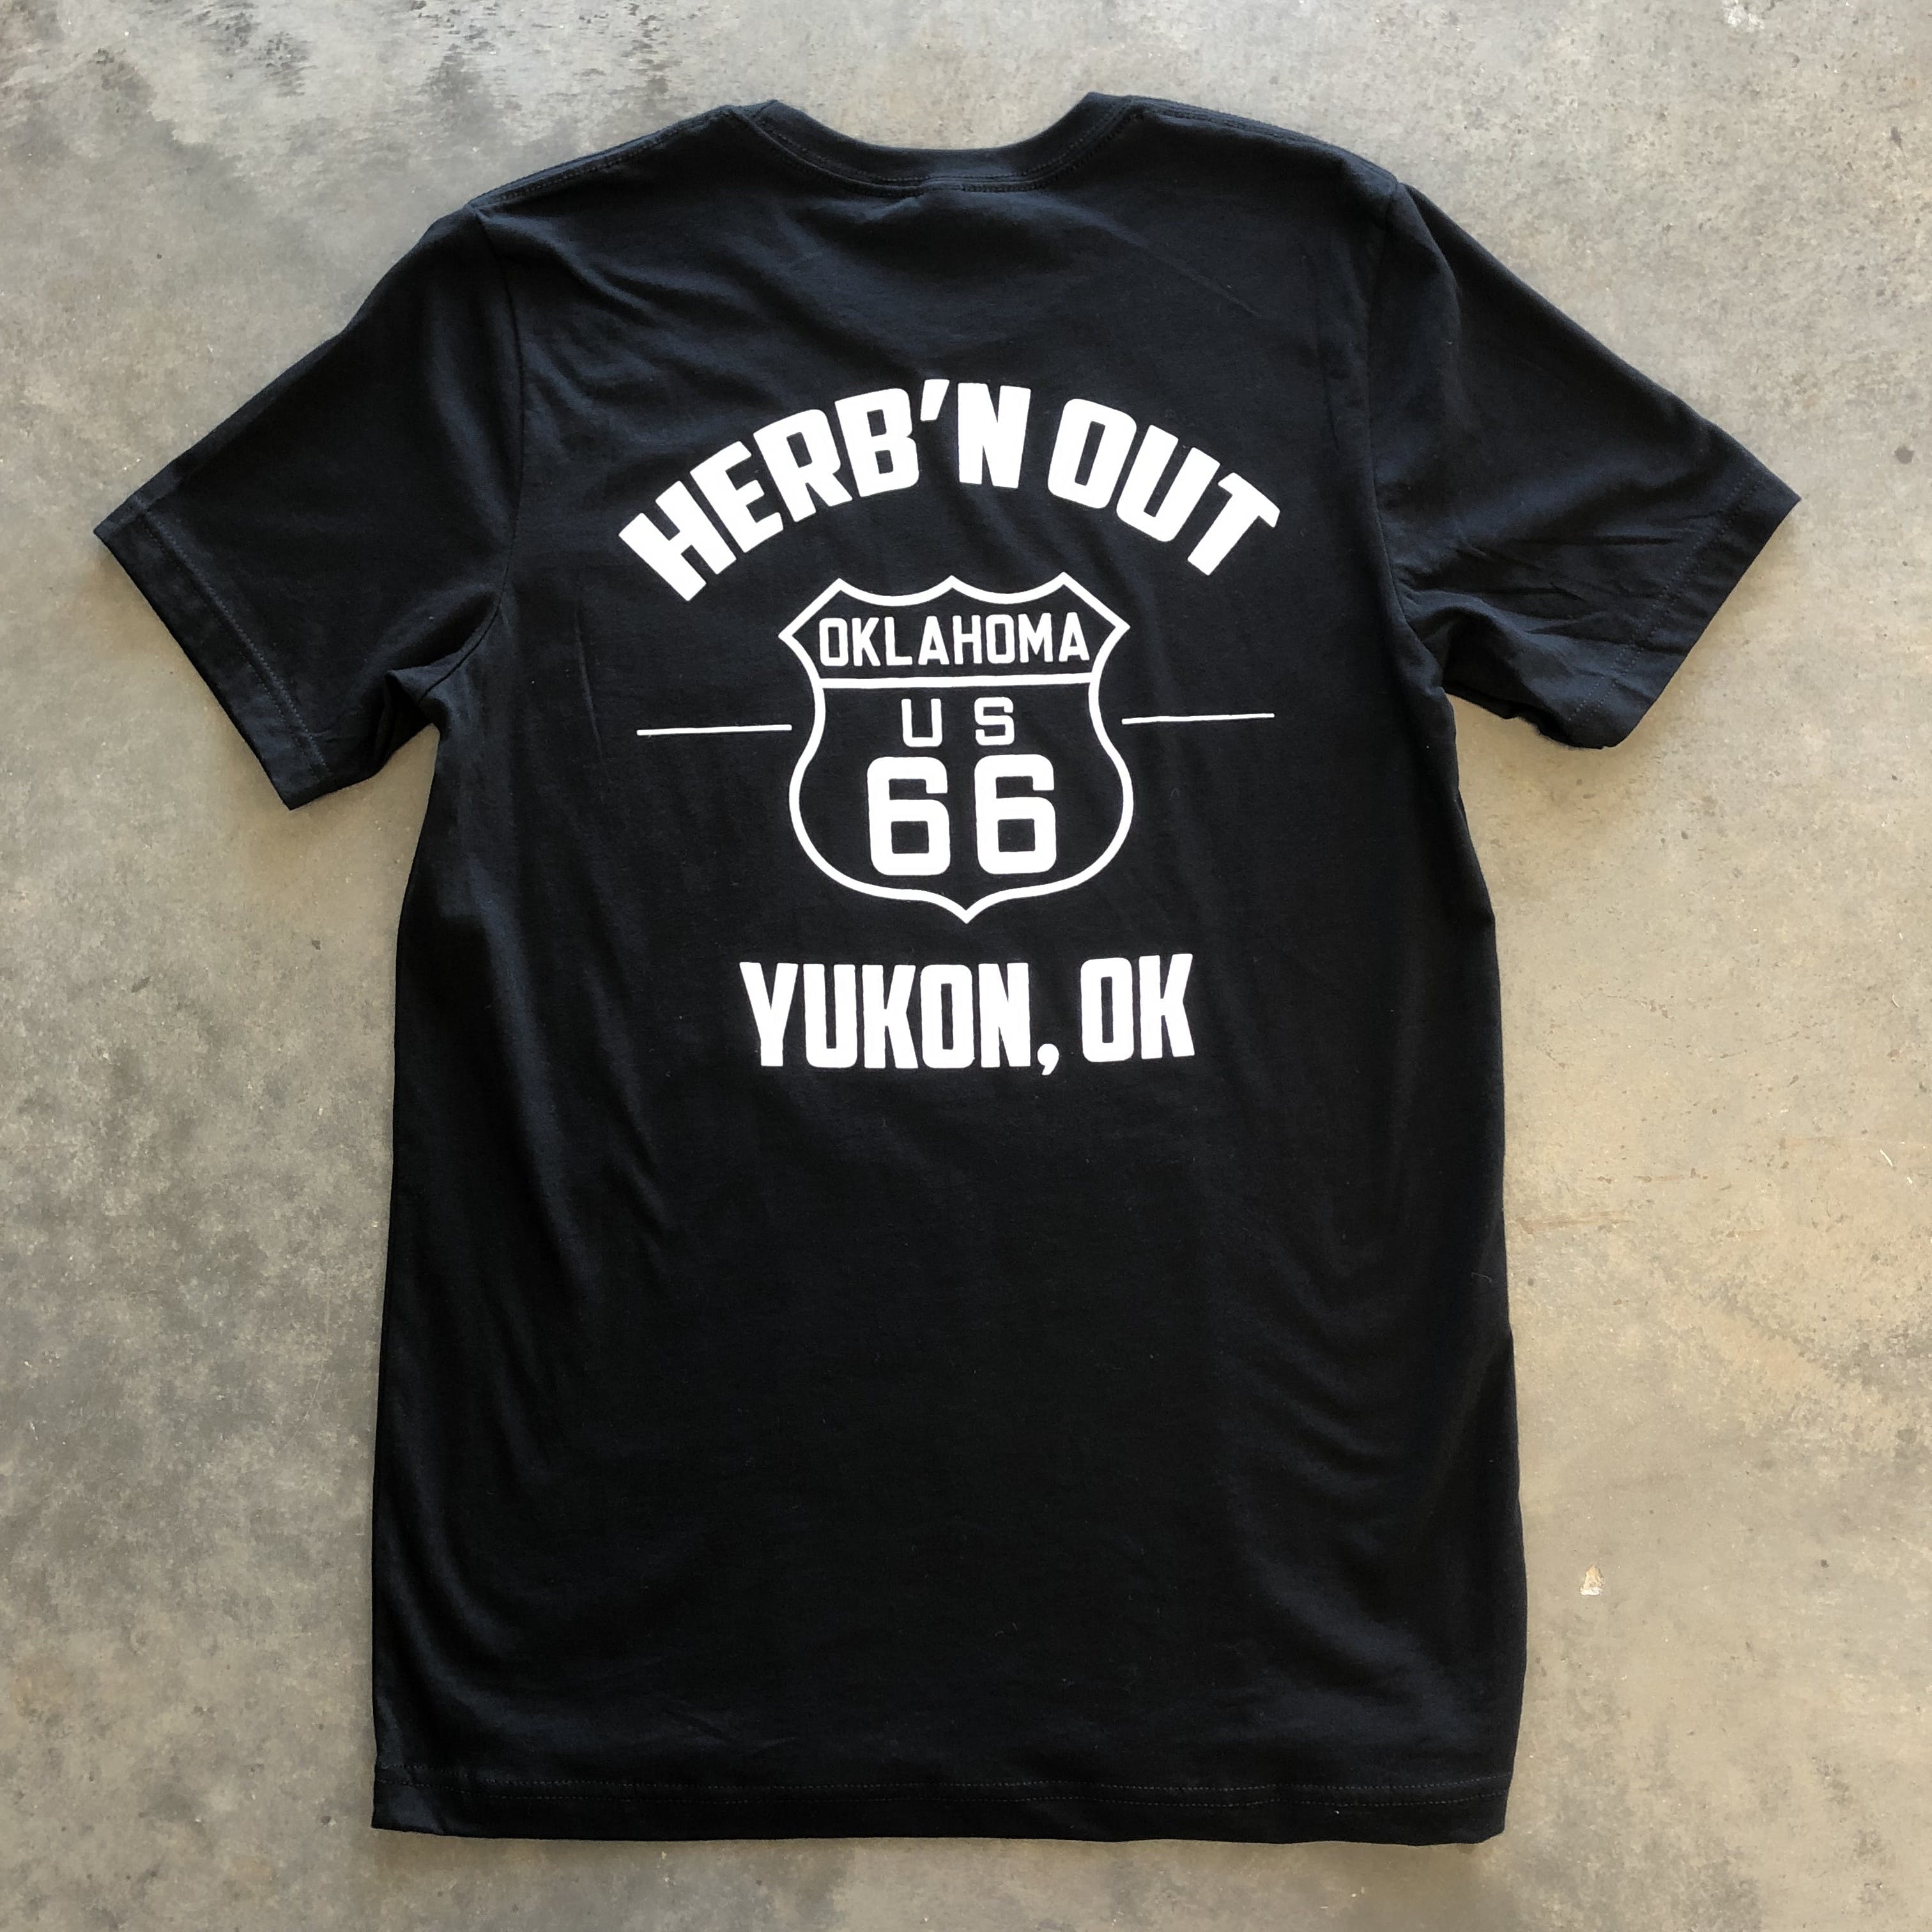 gear-herbn-out-route-66-t-shirt